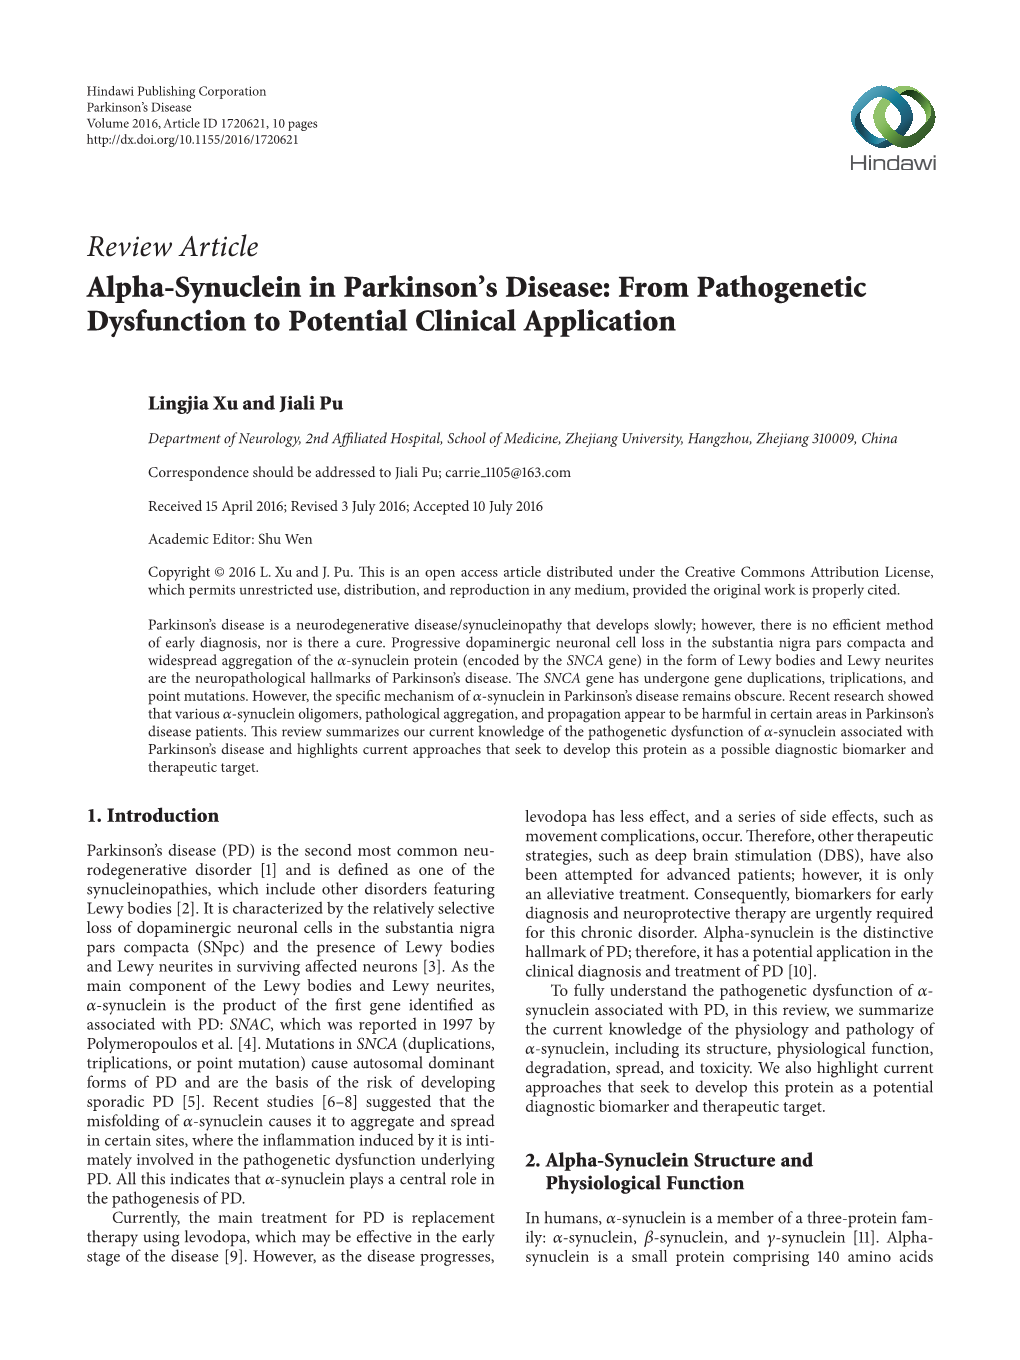 Alpha-Synuclein in Parkinson's Disease: from Pathogenetic